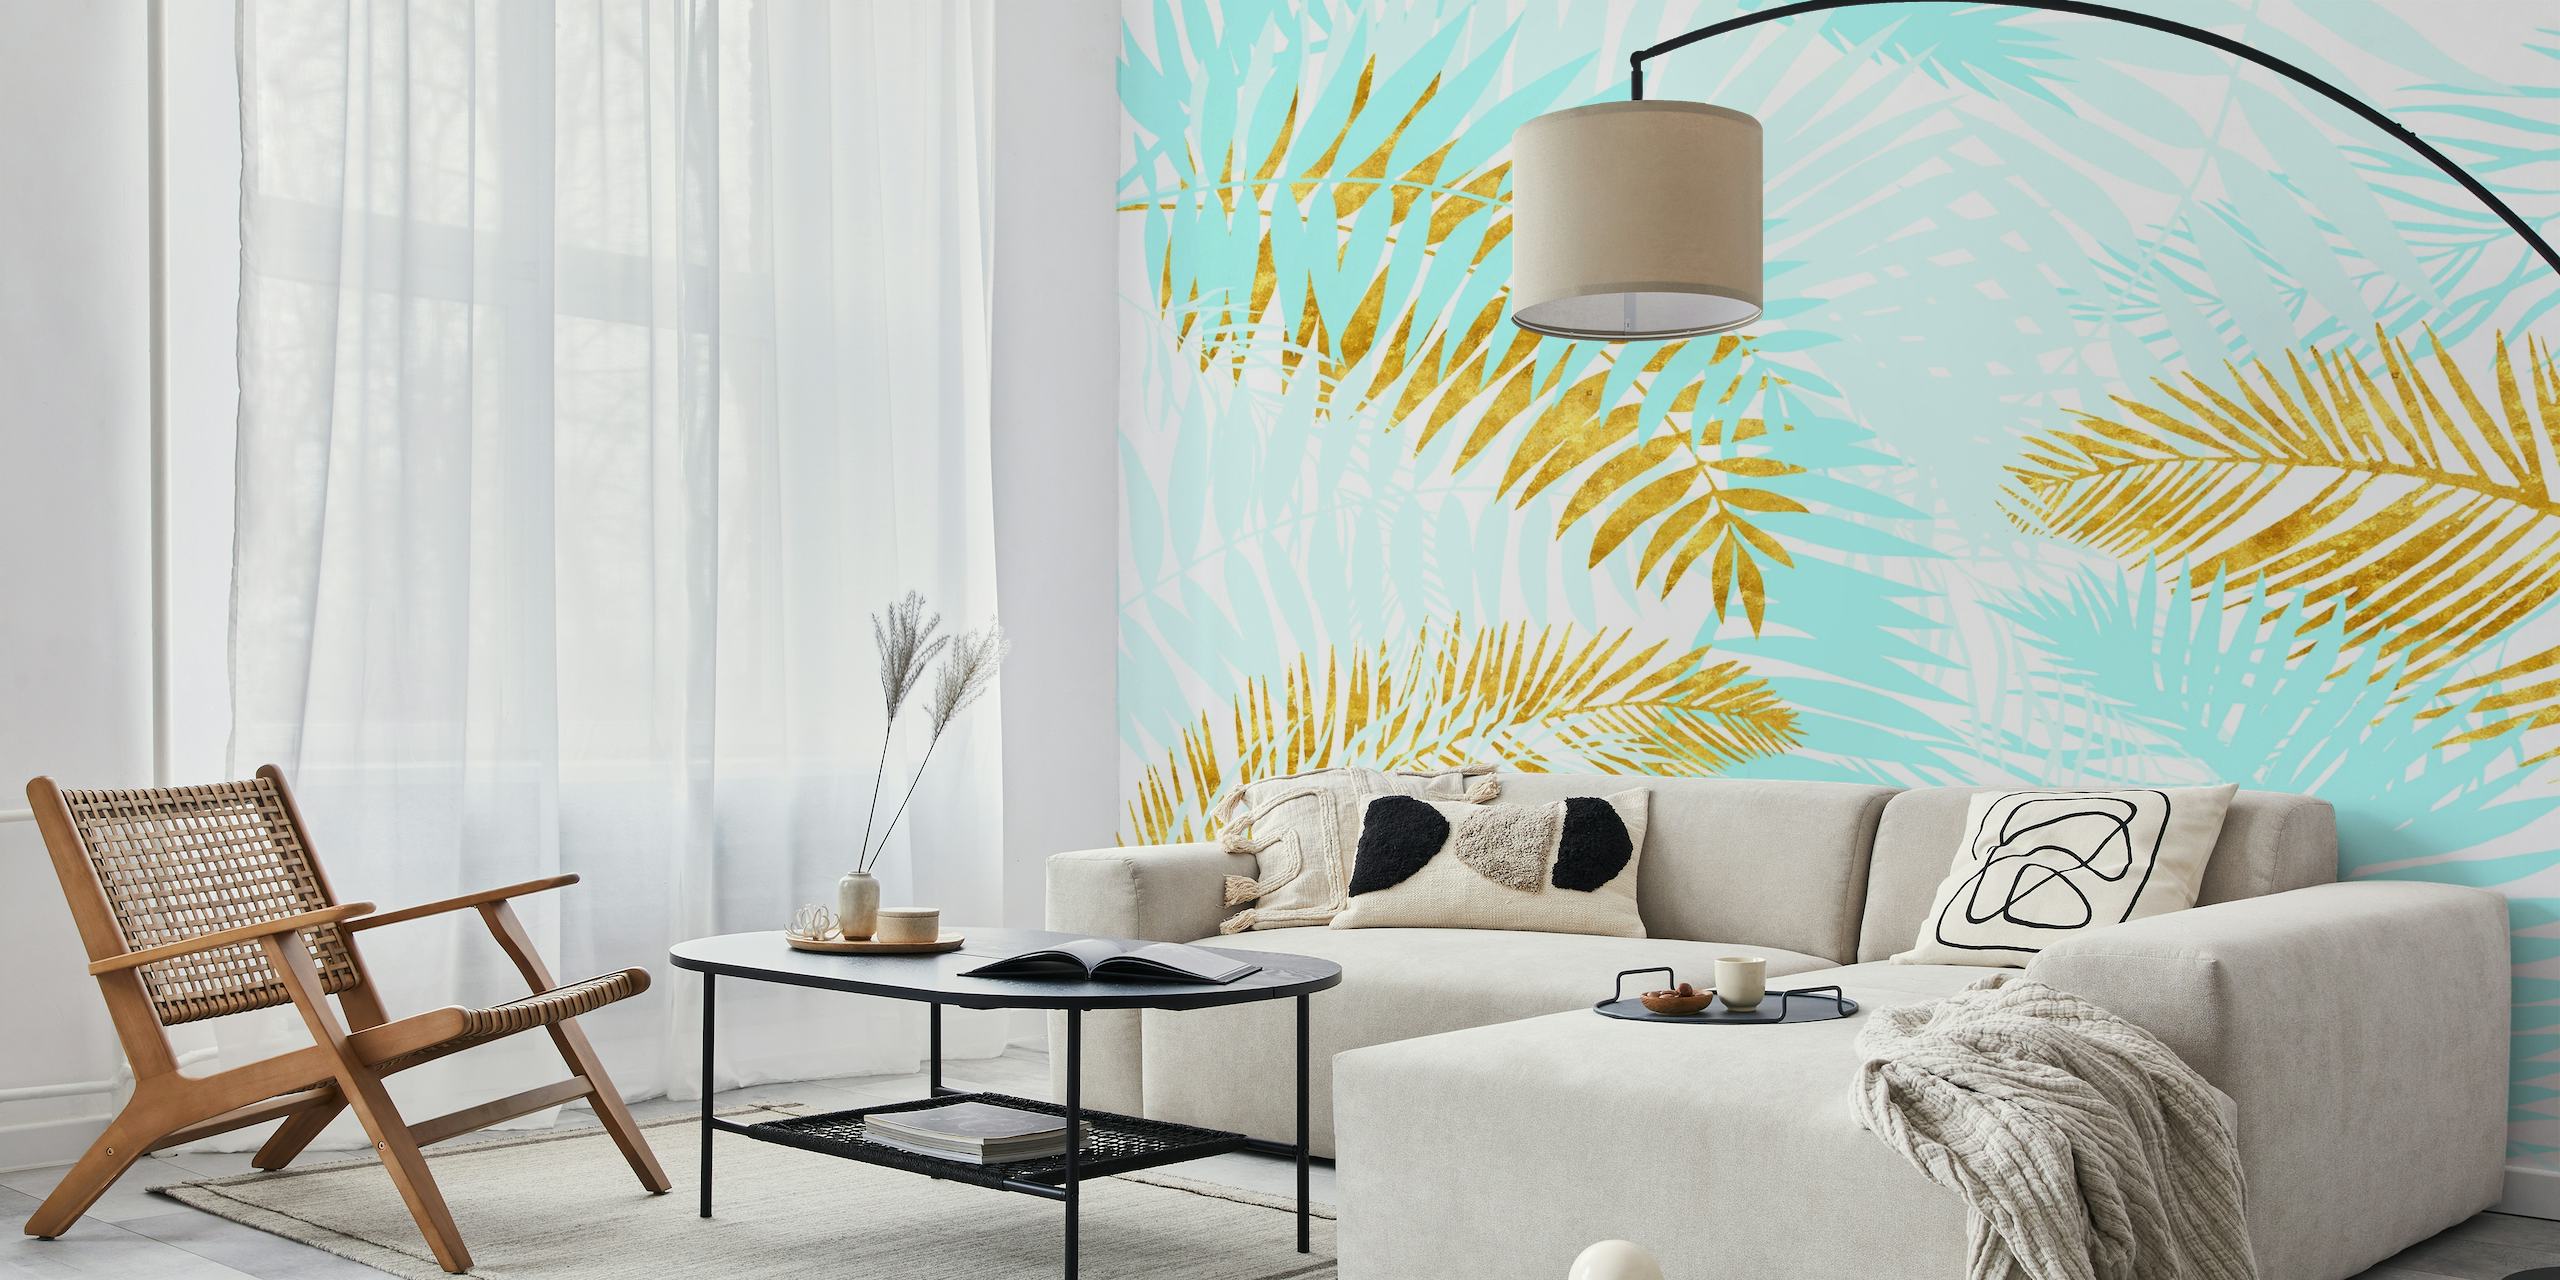 Teal and Gold Palm Leaves wall mural with golden palm fronds on a teal background